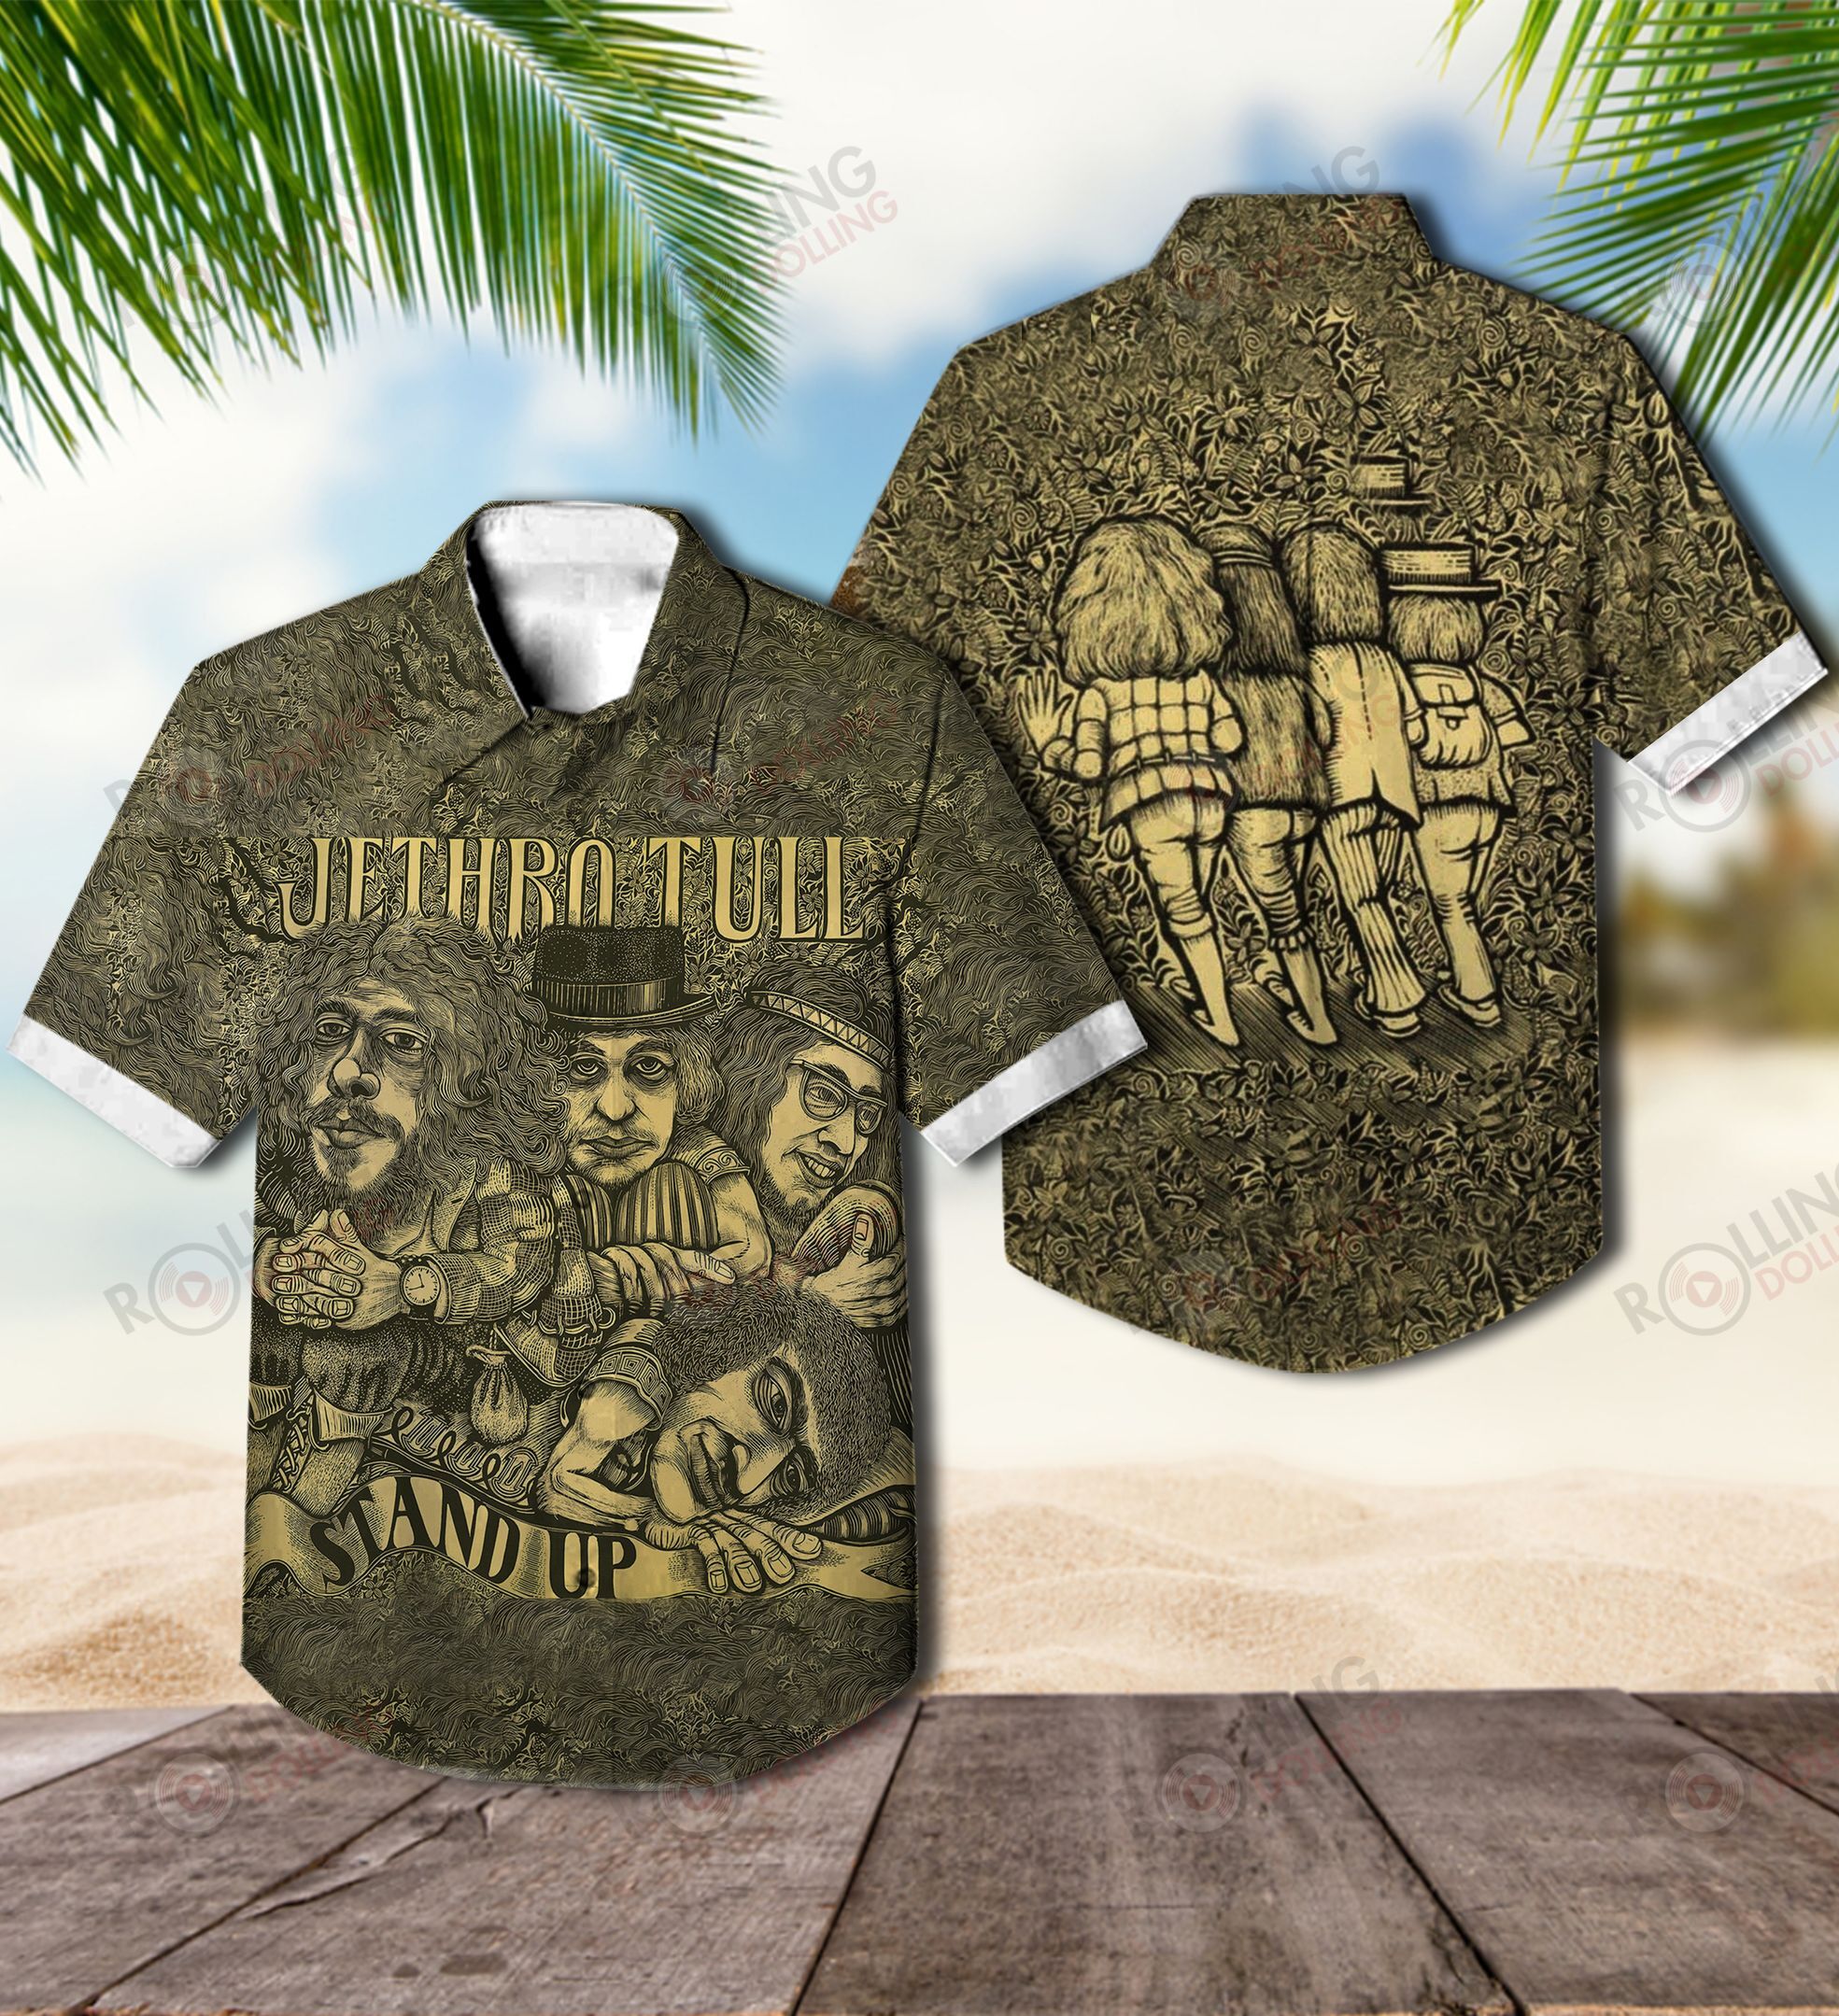 The Hawaiian Shirt is a popular shirt that is worn by Rock band fans 83